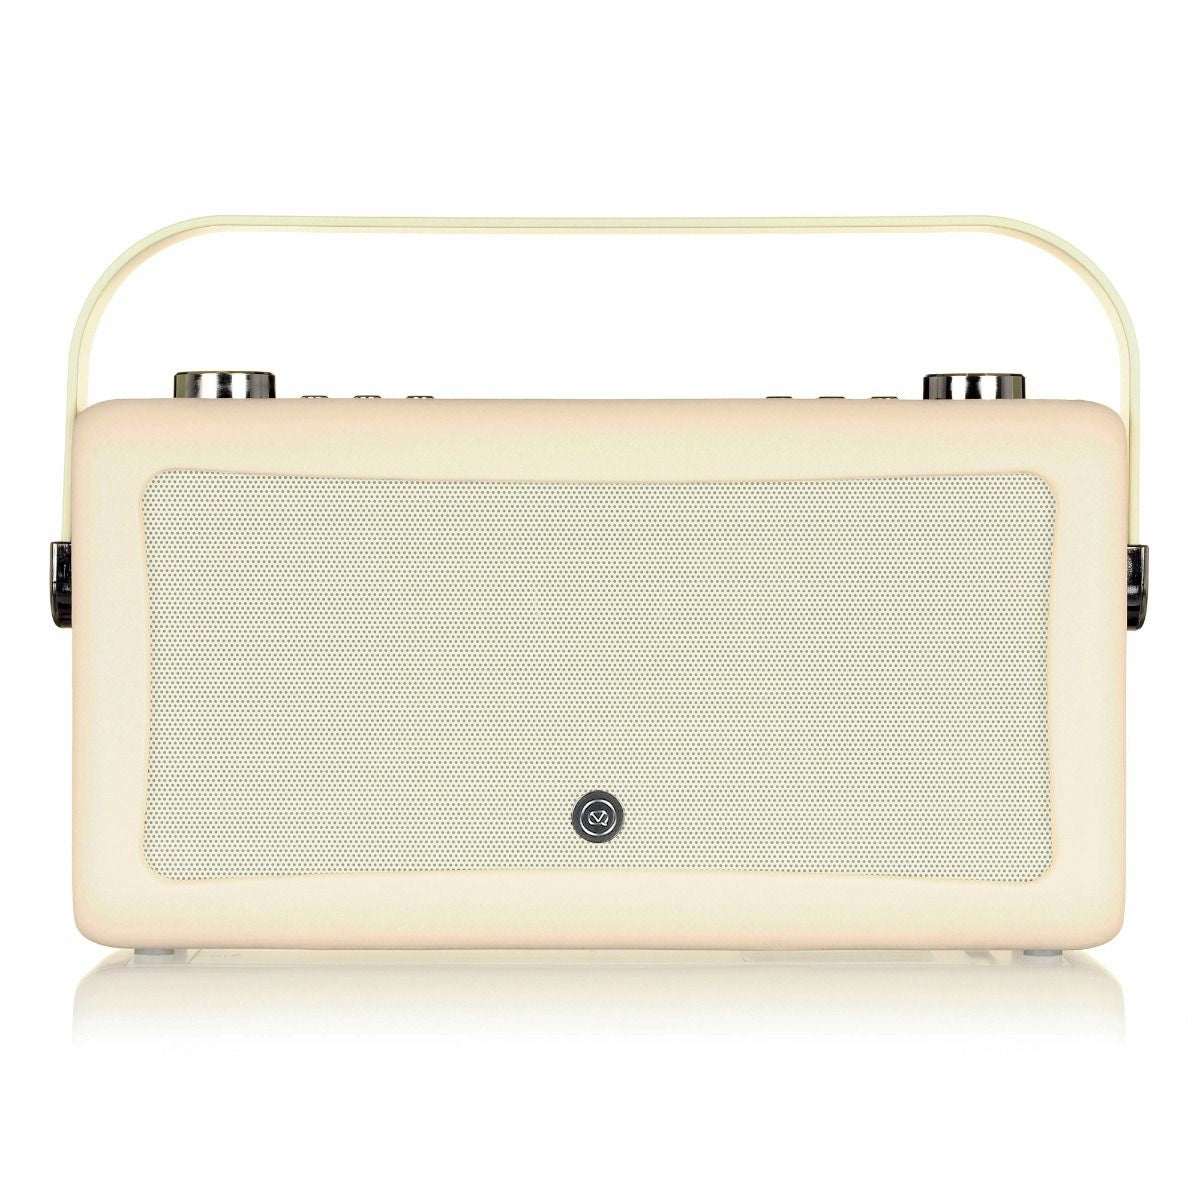 VQ Hepburn Mk II  Portable DAB+/FM Radio & Bluetooth Speaker with Rechargeable Battery Pack in Cream - 2